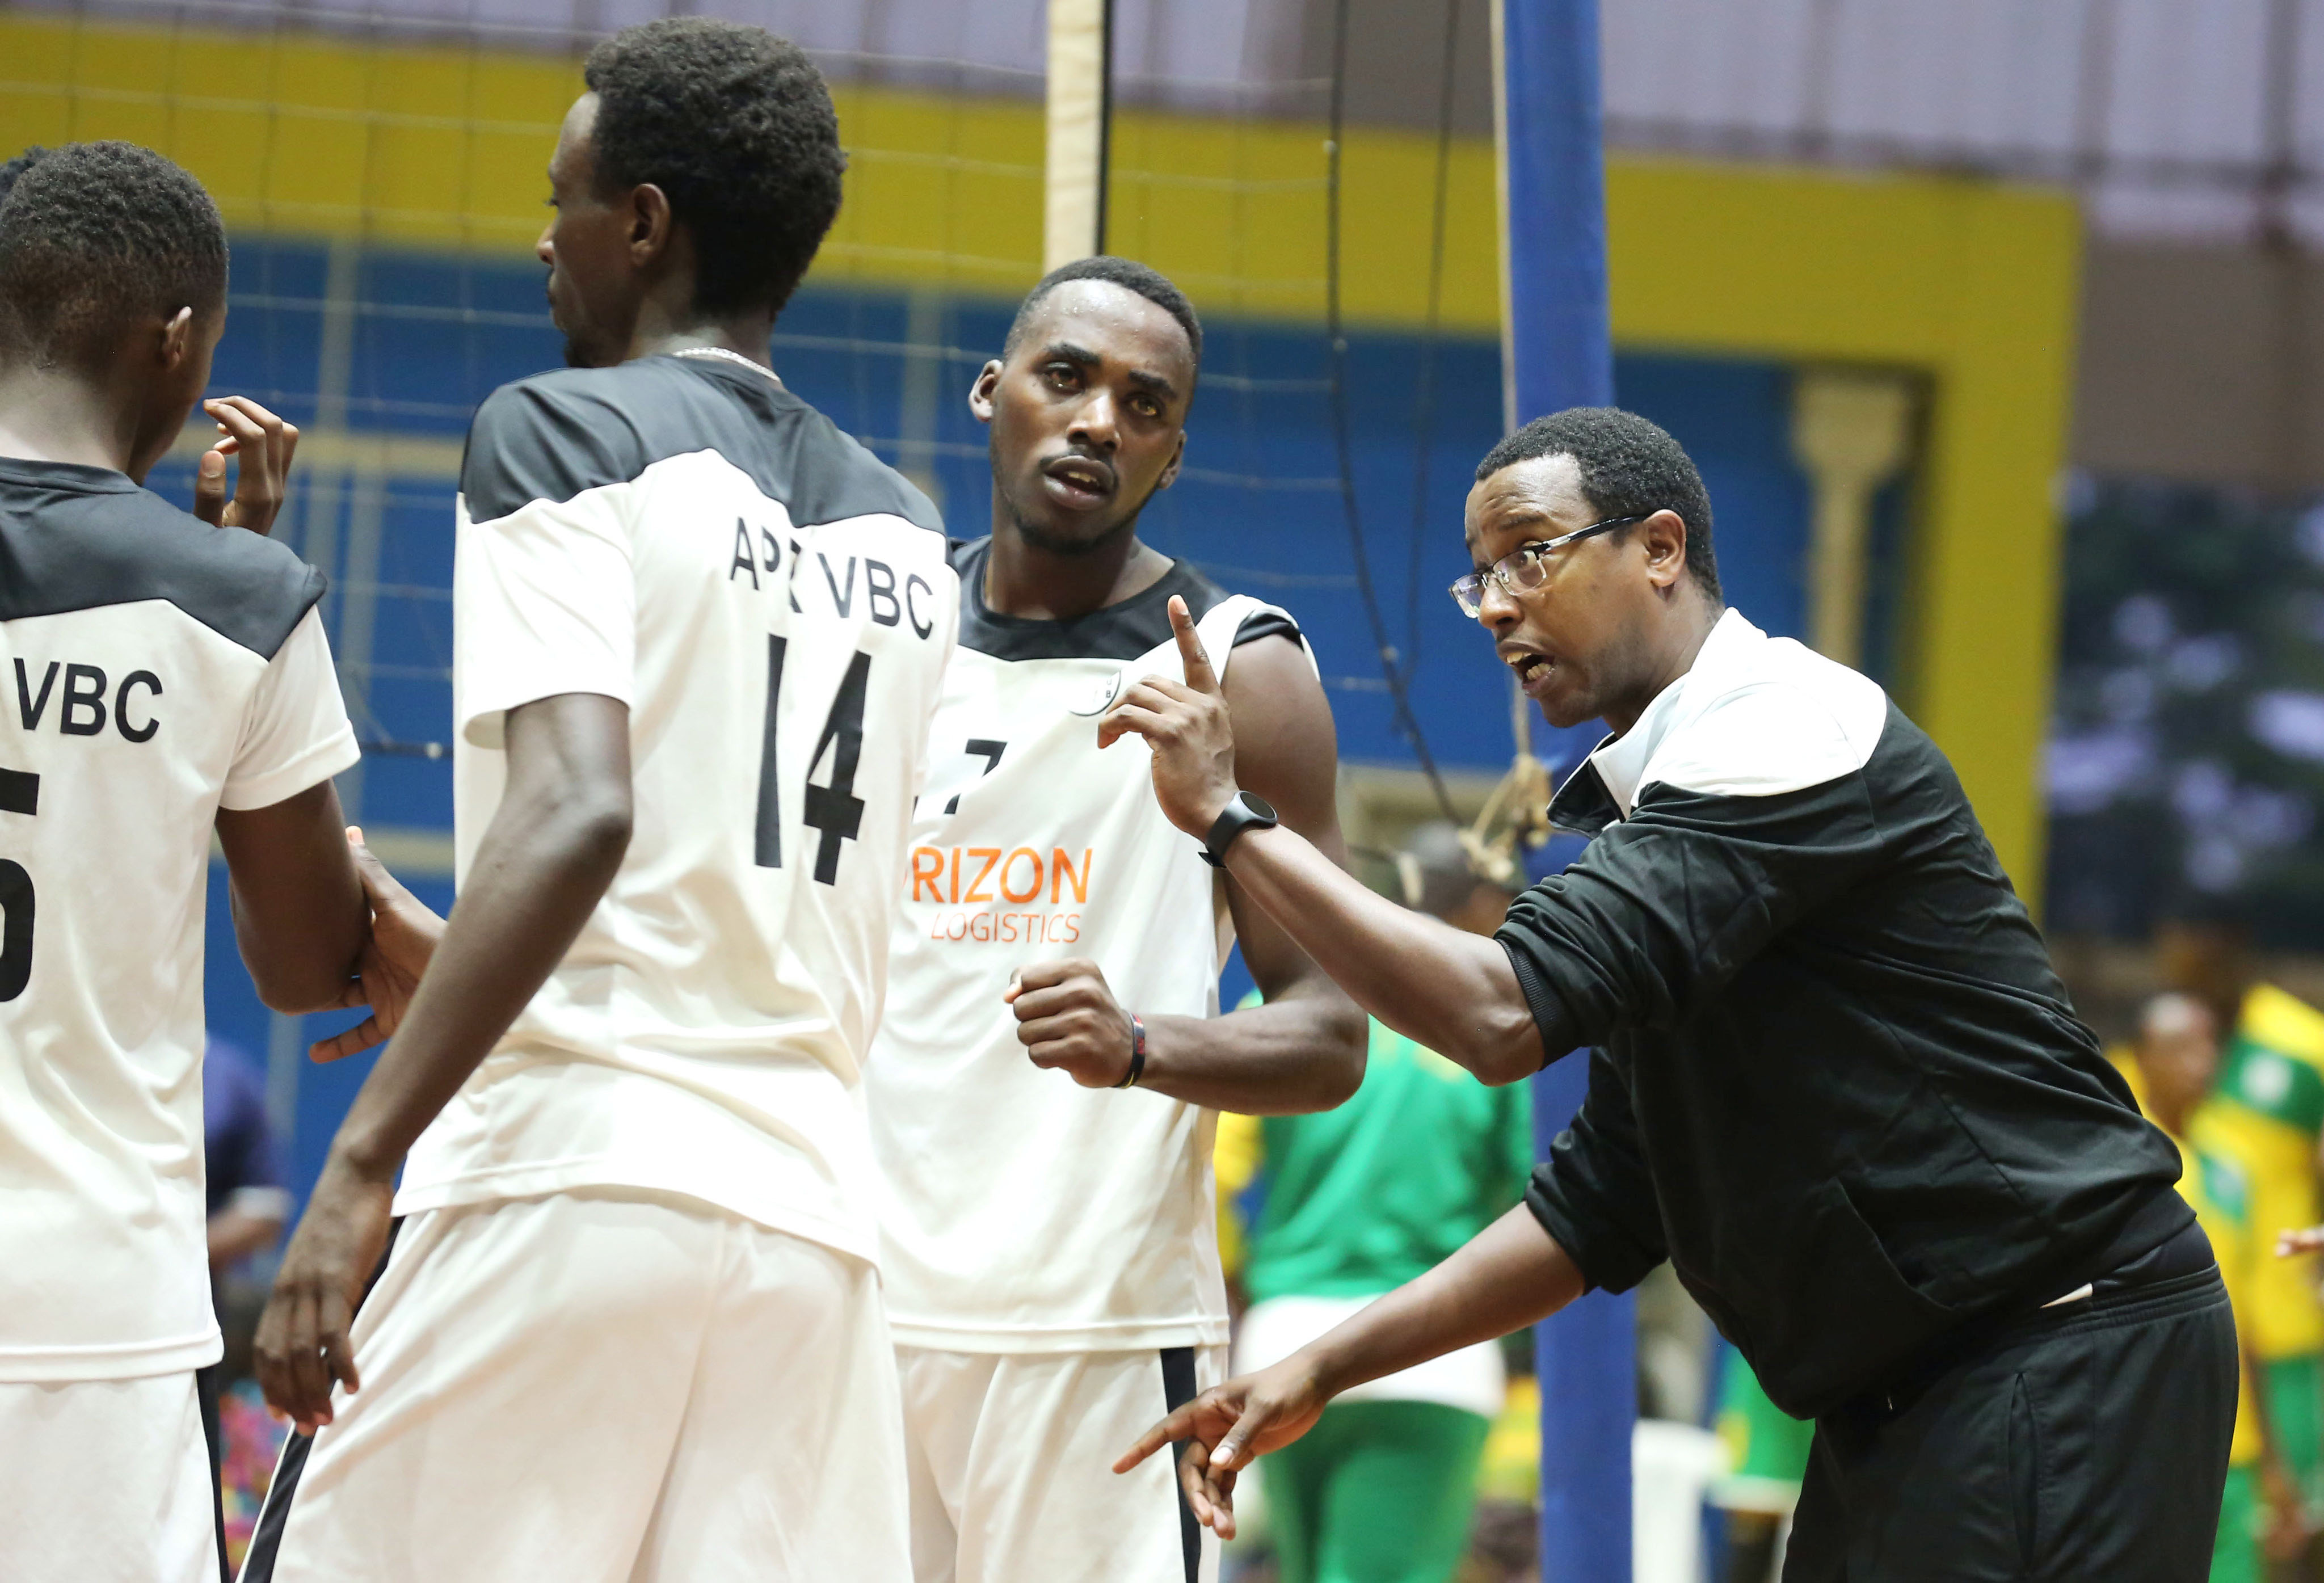 APR VB Club head coach Elie Mutabazi gives instructions to his players during a past league match. The Rwandan champions has received all-clear to start training ahead of the 2021 African Club Championship. /Sam Ngendahimana